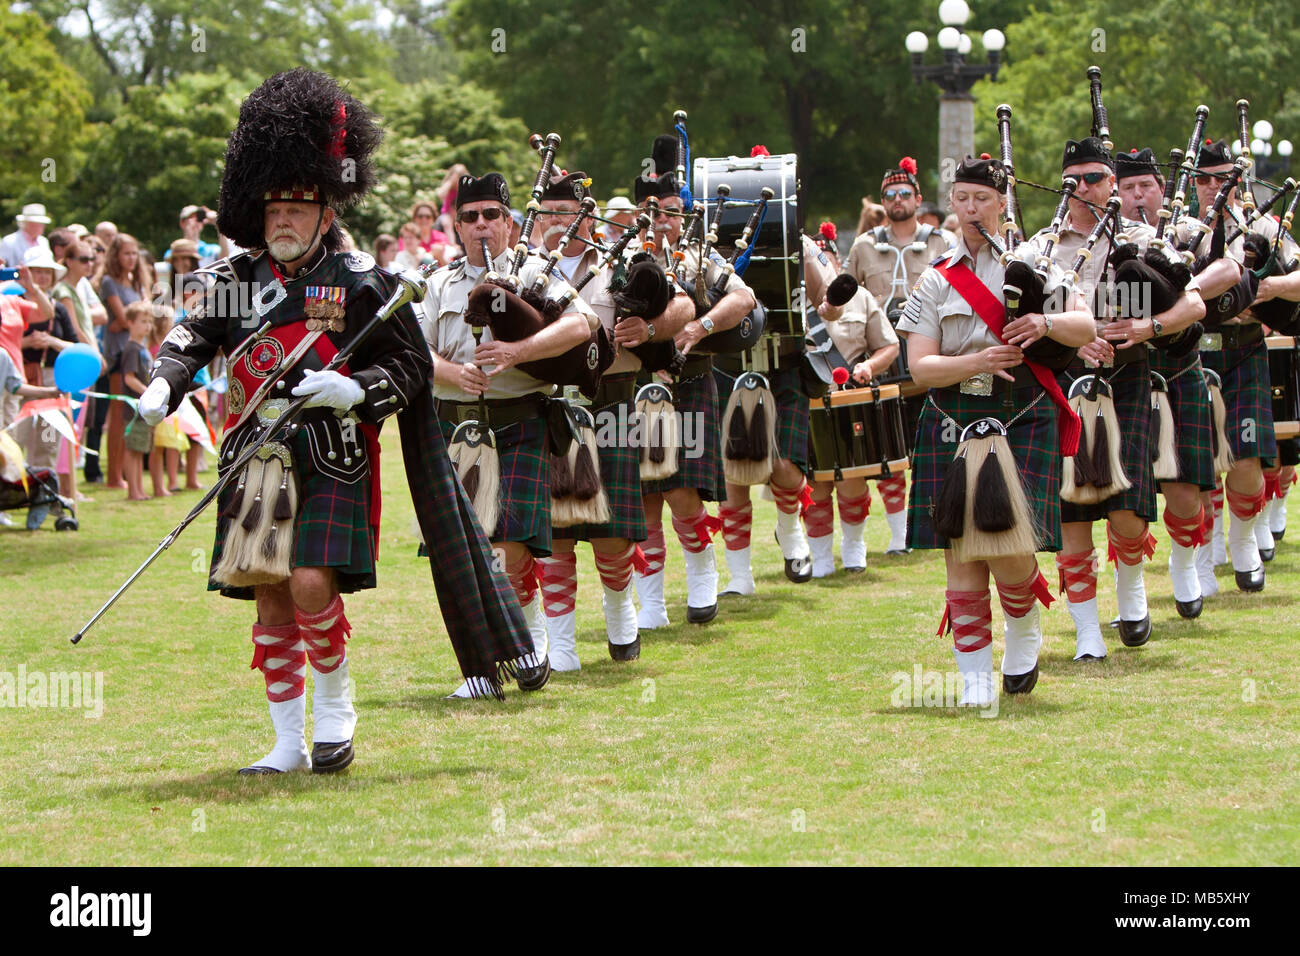 A drum major leads a local bagpipes group in opening the GREAT festival, celebrating Great Britain and the UK on May 25, 2013 in Atlanta, GA. Stock Photo